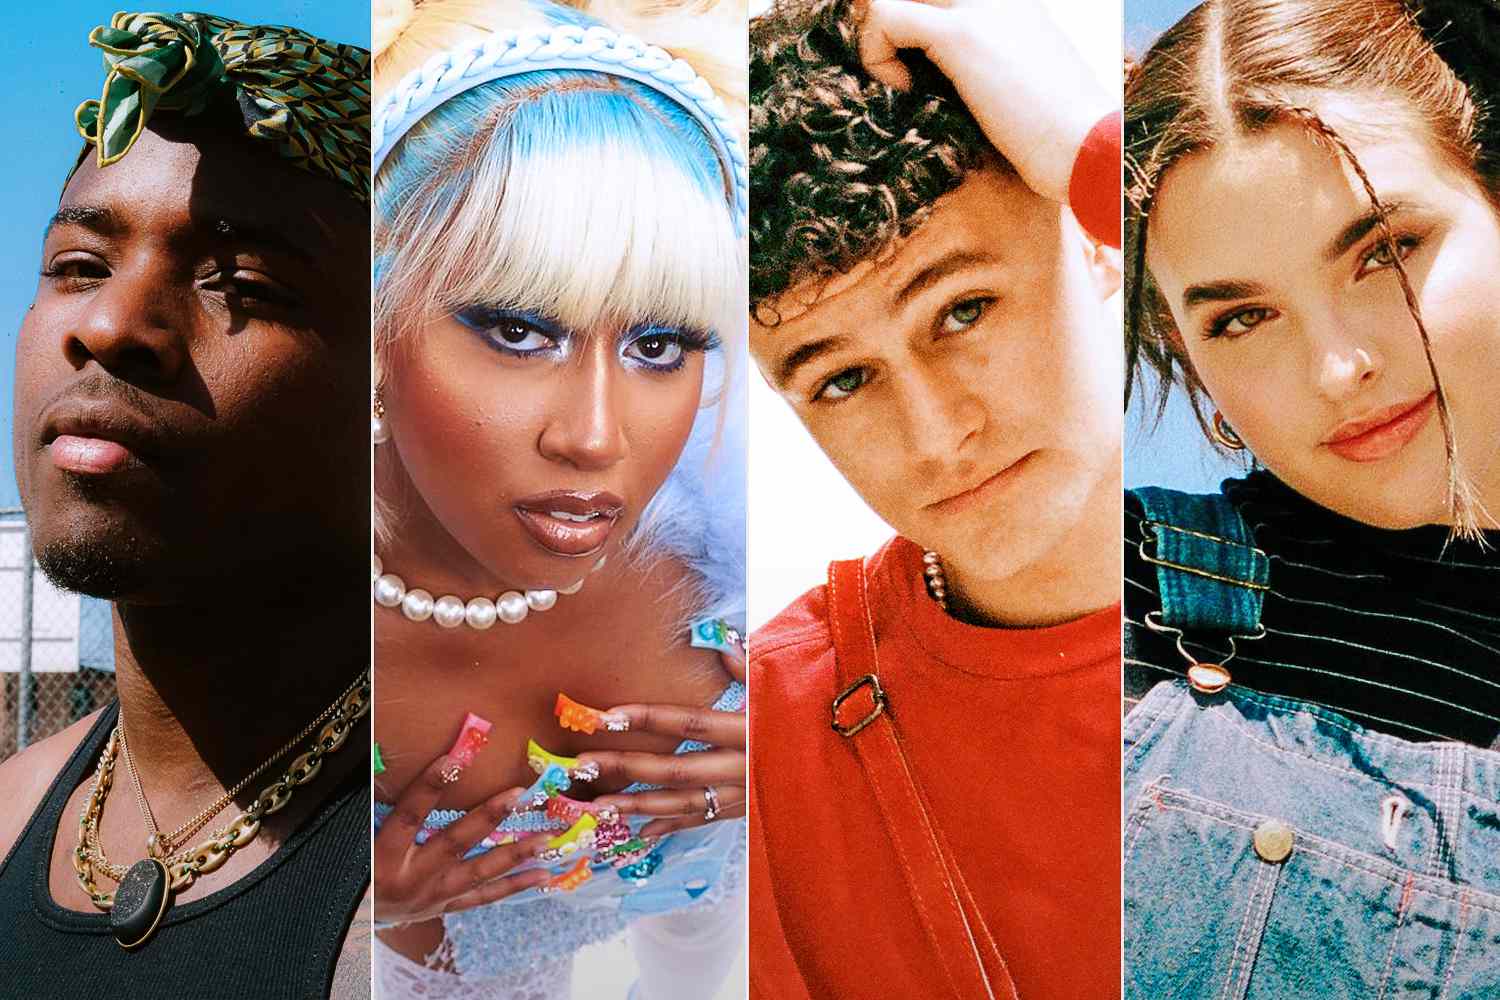 Meet the Talented Emerging Artists Summer 2022 – PEOPLE